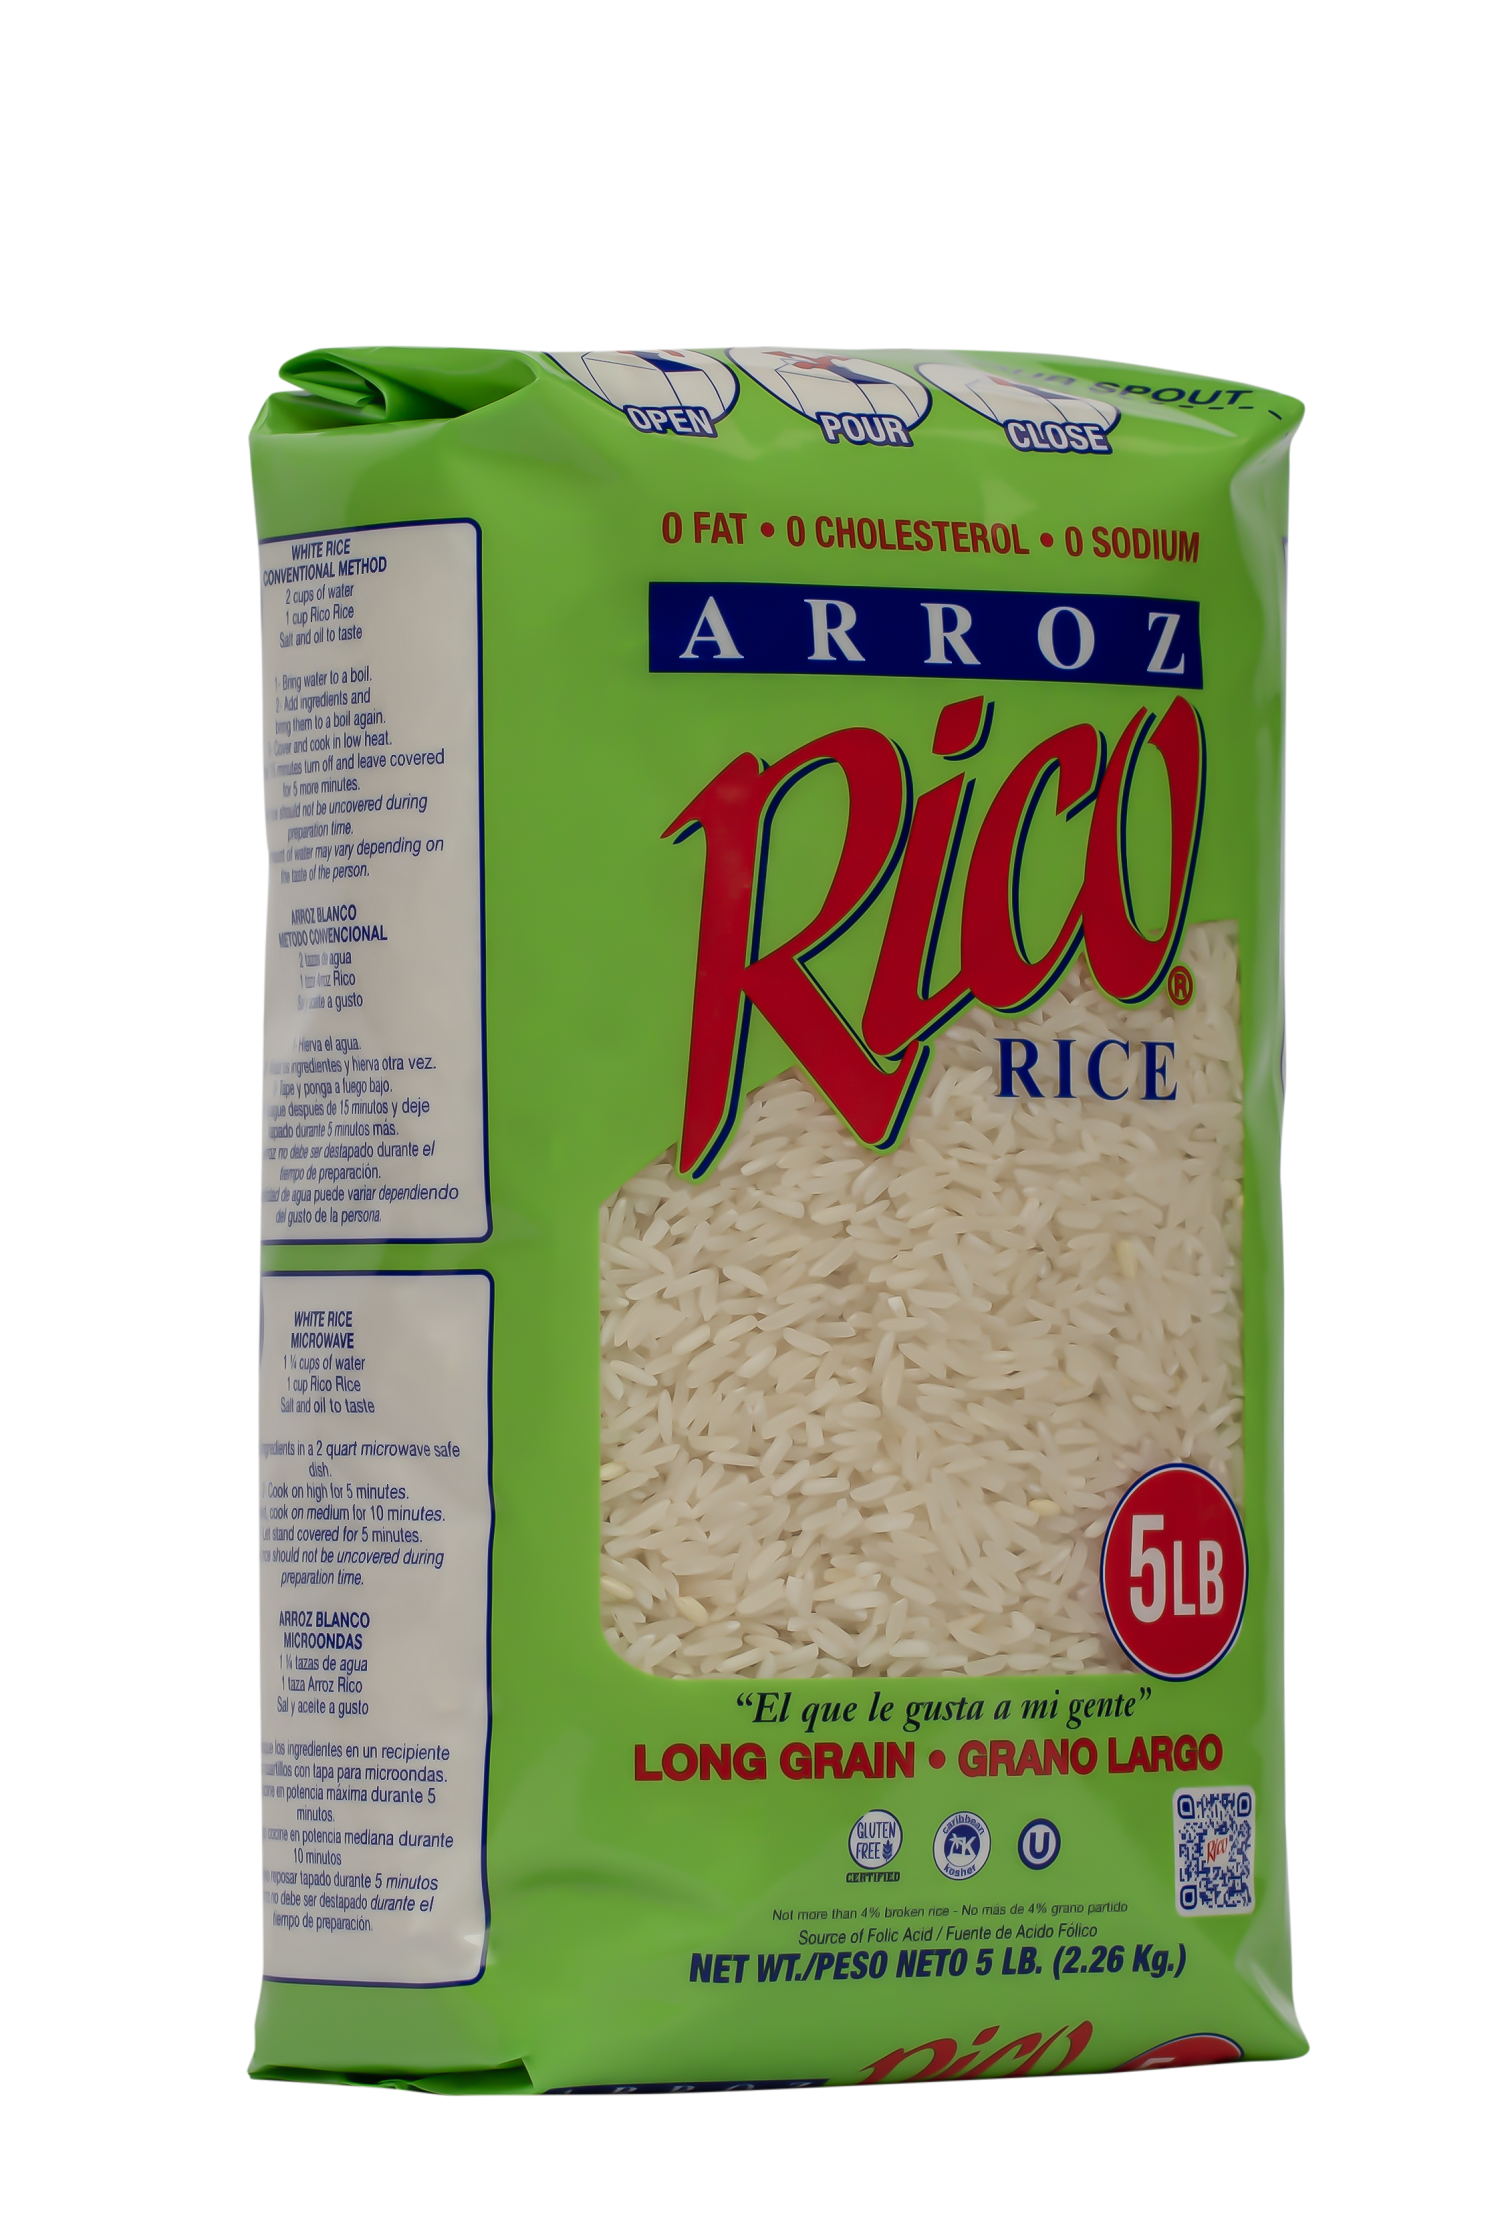 Rico Long Grain Rice 5 lb Gluten Free Made in Puerto Rico - image 3 of 8